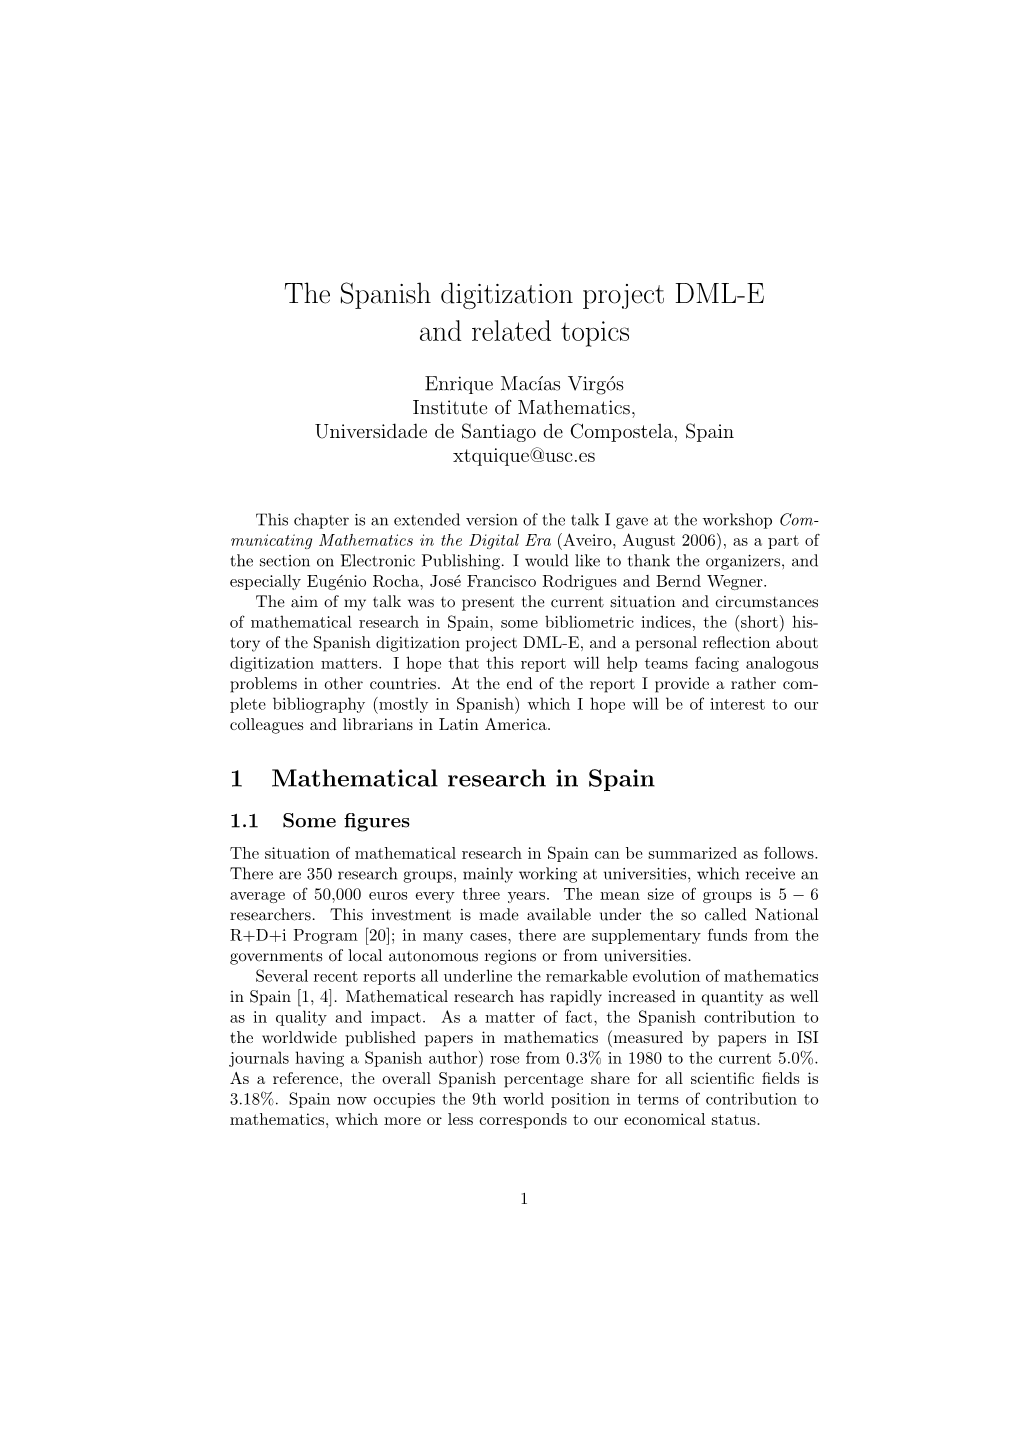 The Spanish Digitization Project DML-E and Related Topics